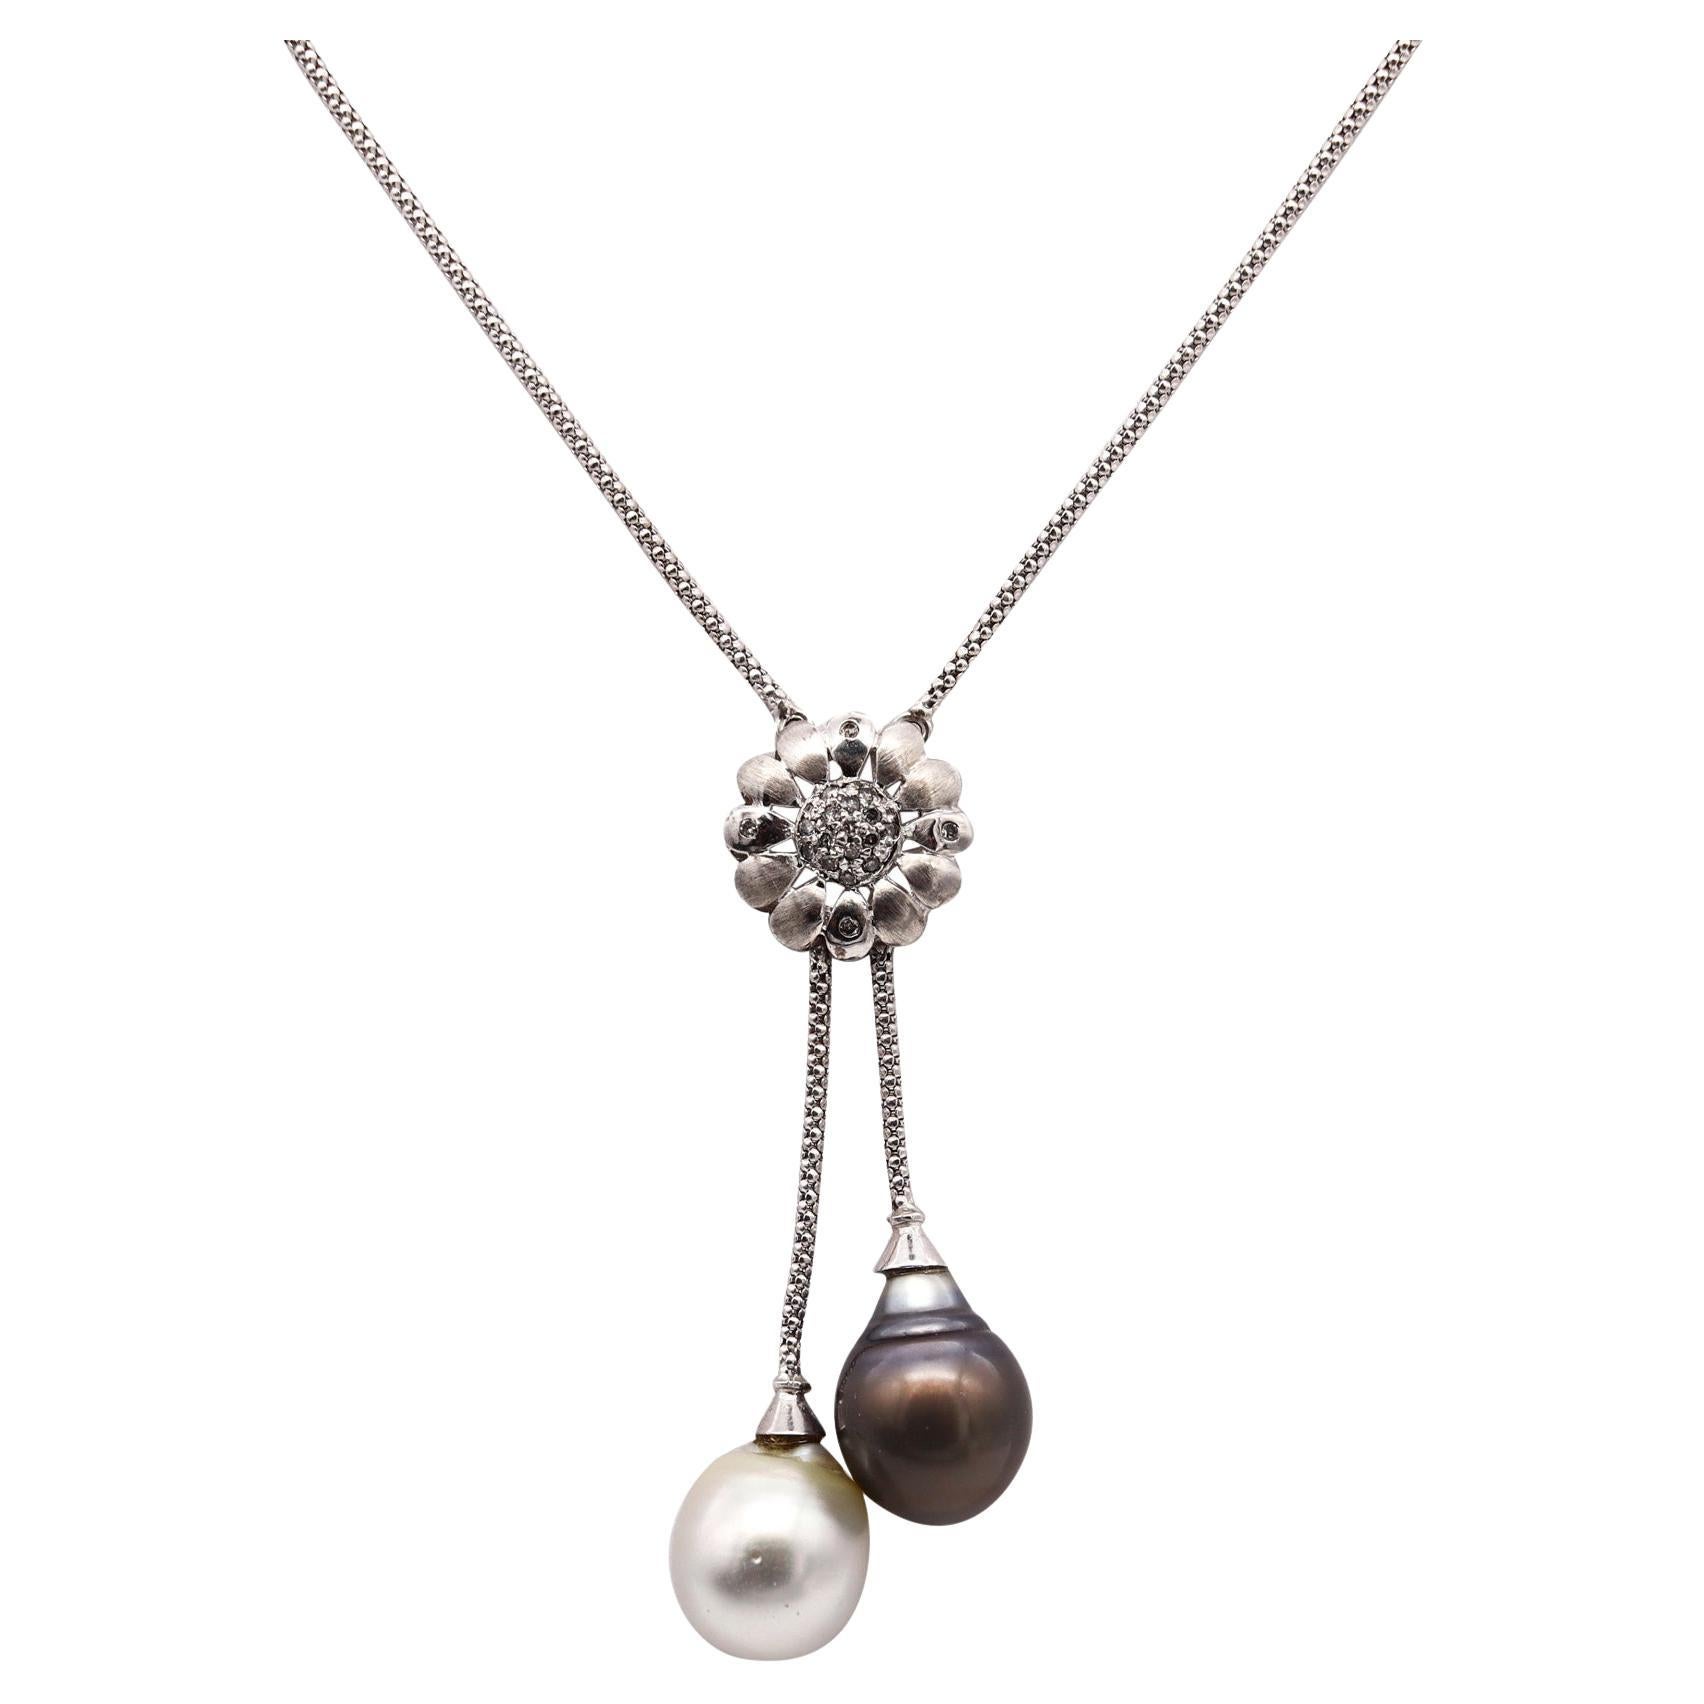 UnoAerre Lariat Necklace In 18Kt Gold With Diamonds Black White South Sea Pearls For Sale